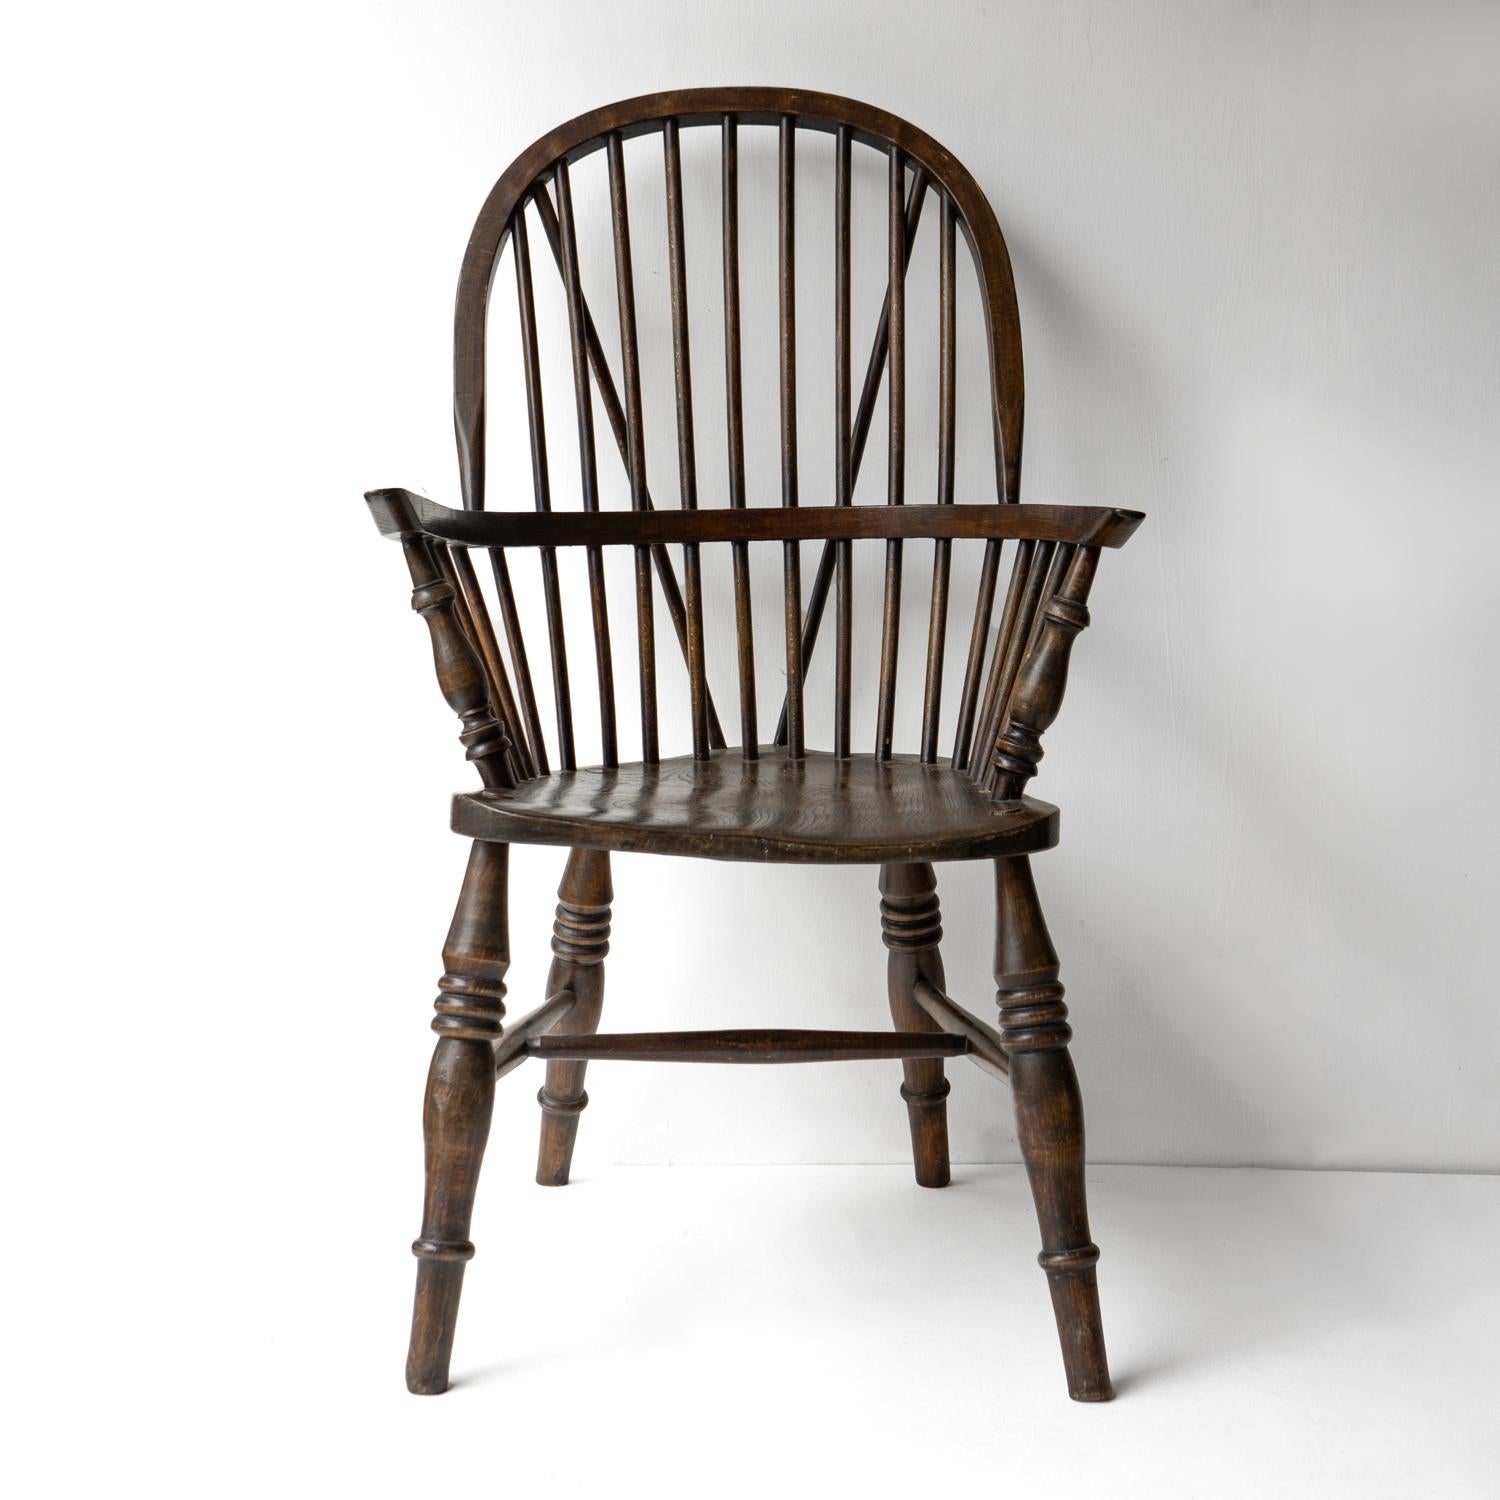 WINDSOR STICK BACK CHAIR
Simple stylish lines with a large hoop back, generous seat and arms and turned legs separated by a simple H- stretcher

Completely handmade and charming slightly off with the angles, providing a slightly primitive